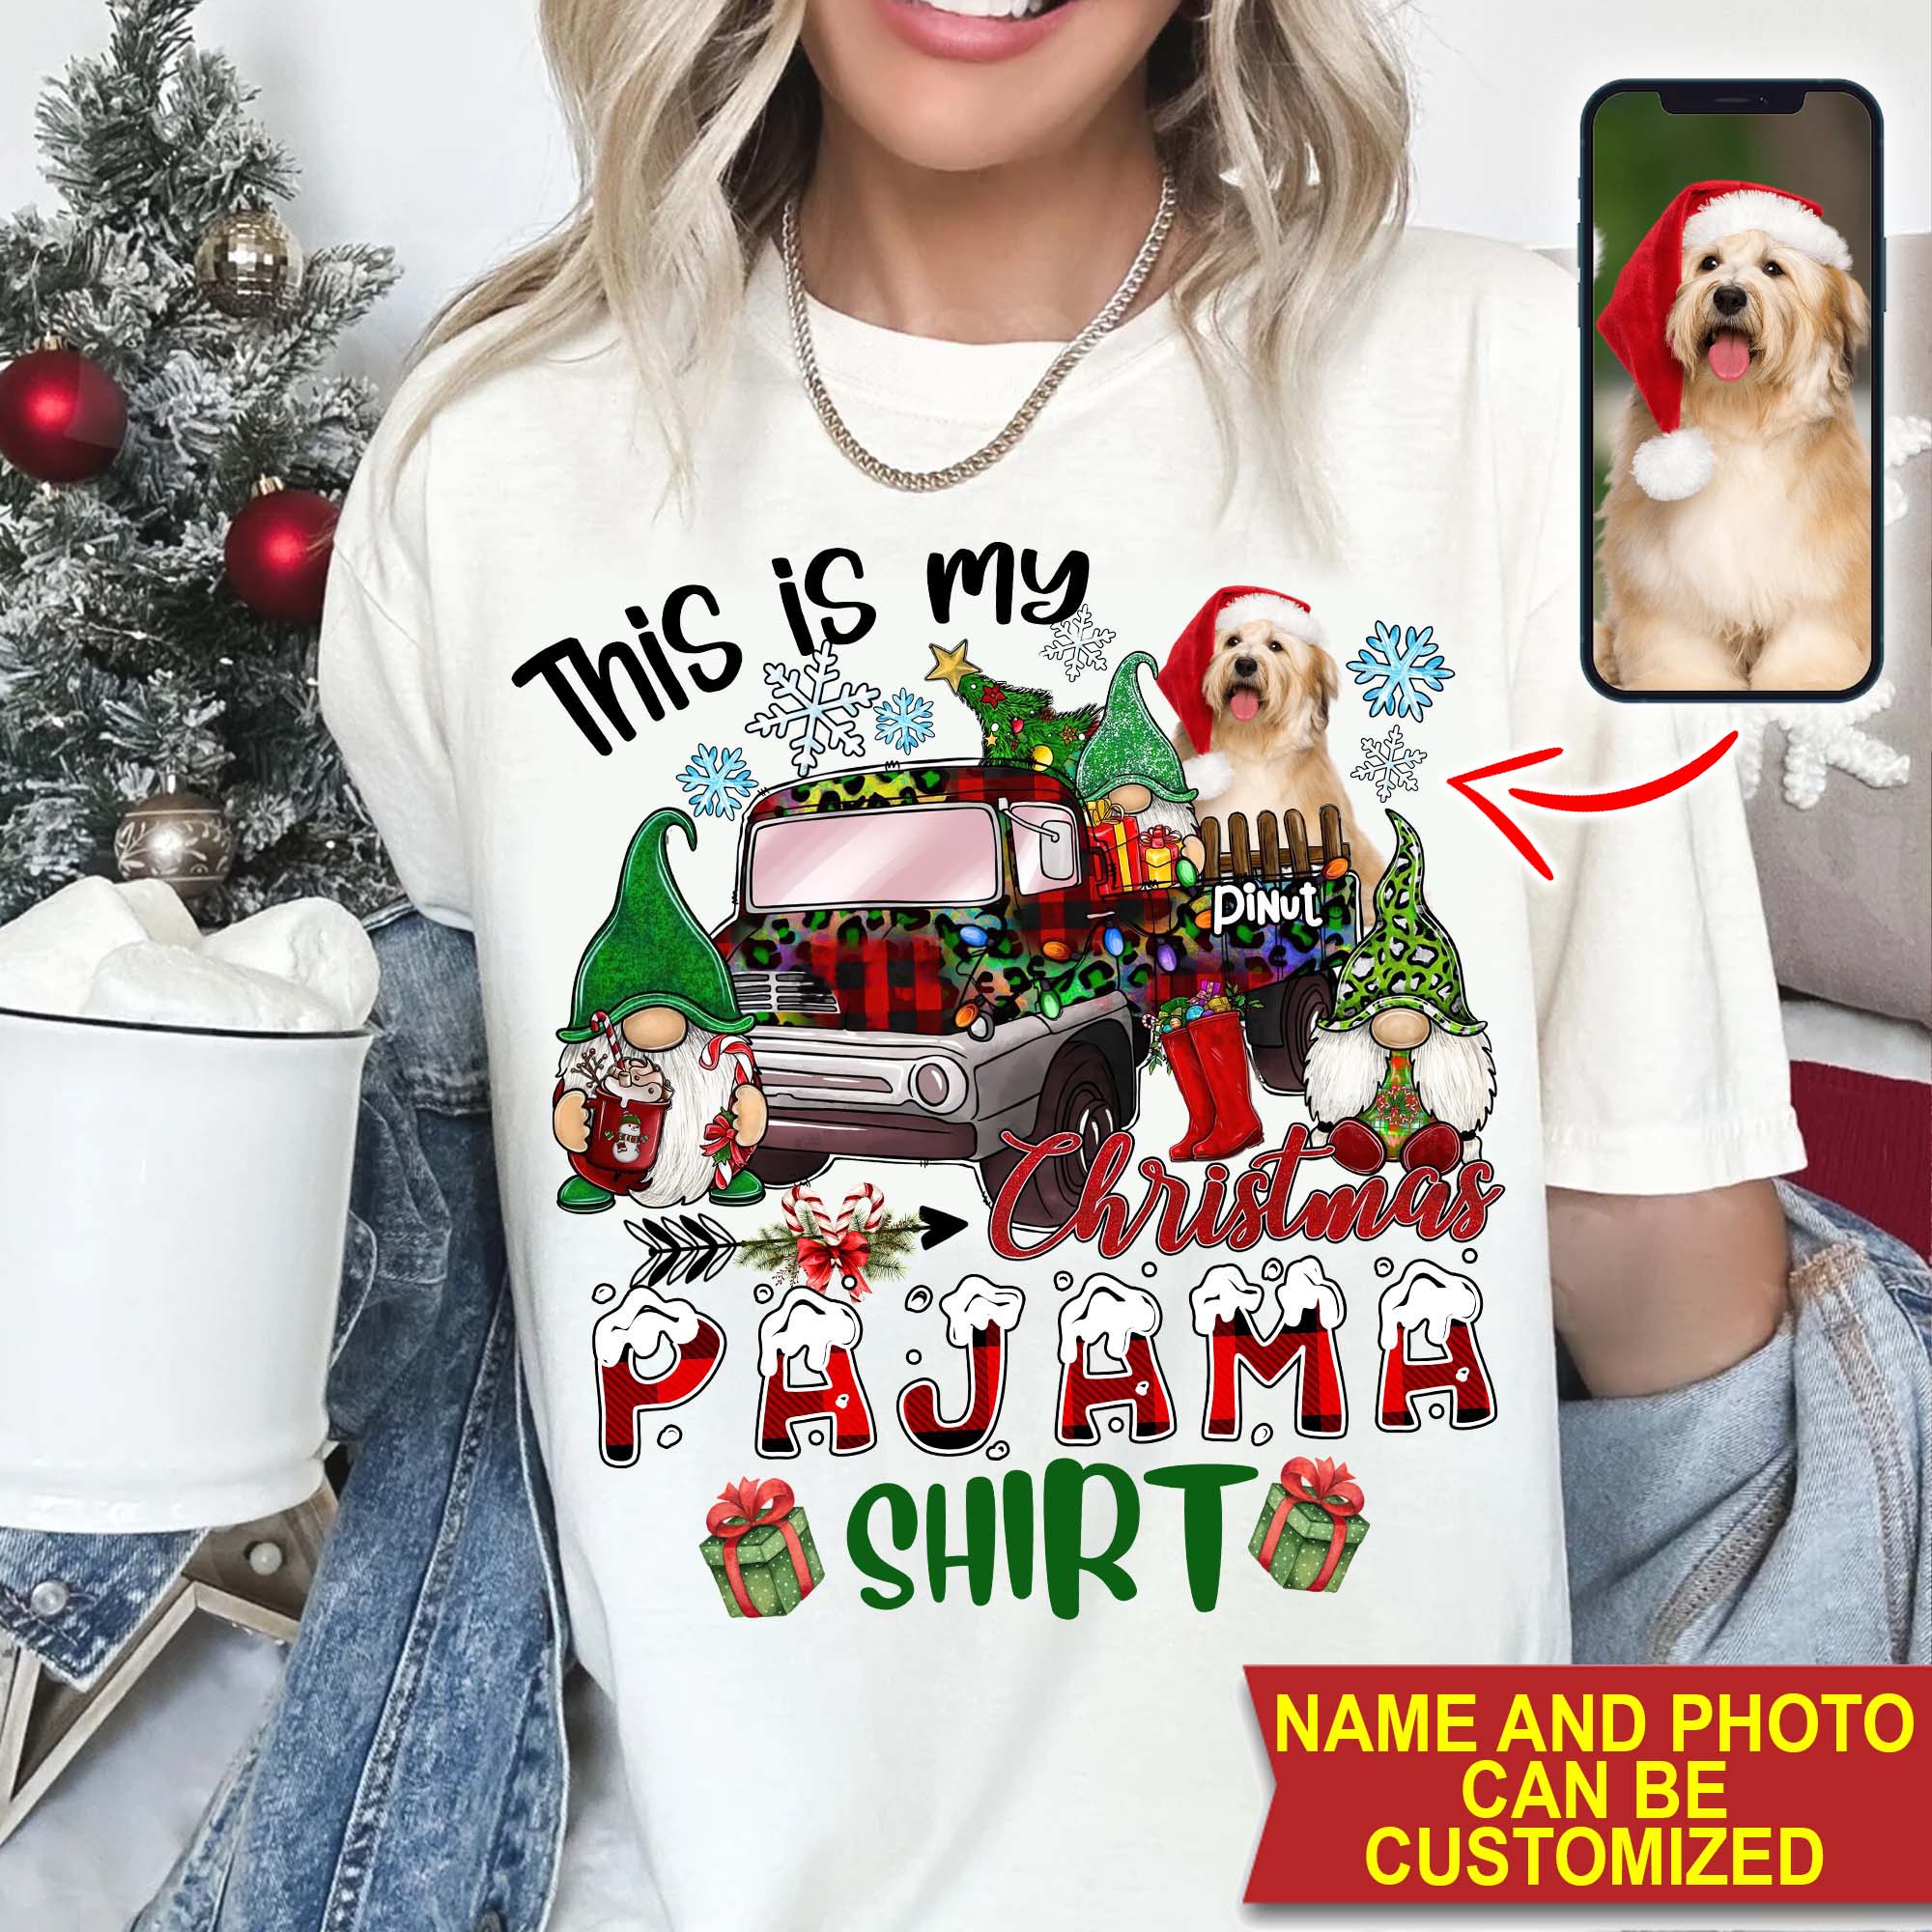 This Is My Christmas Pyjama Shirt- Custom Photo And Name - Personalized T-Shirt - Family Gift, Gift For Pet Lover